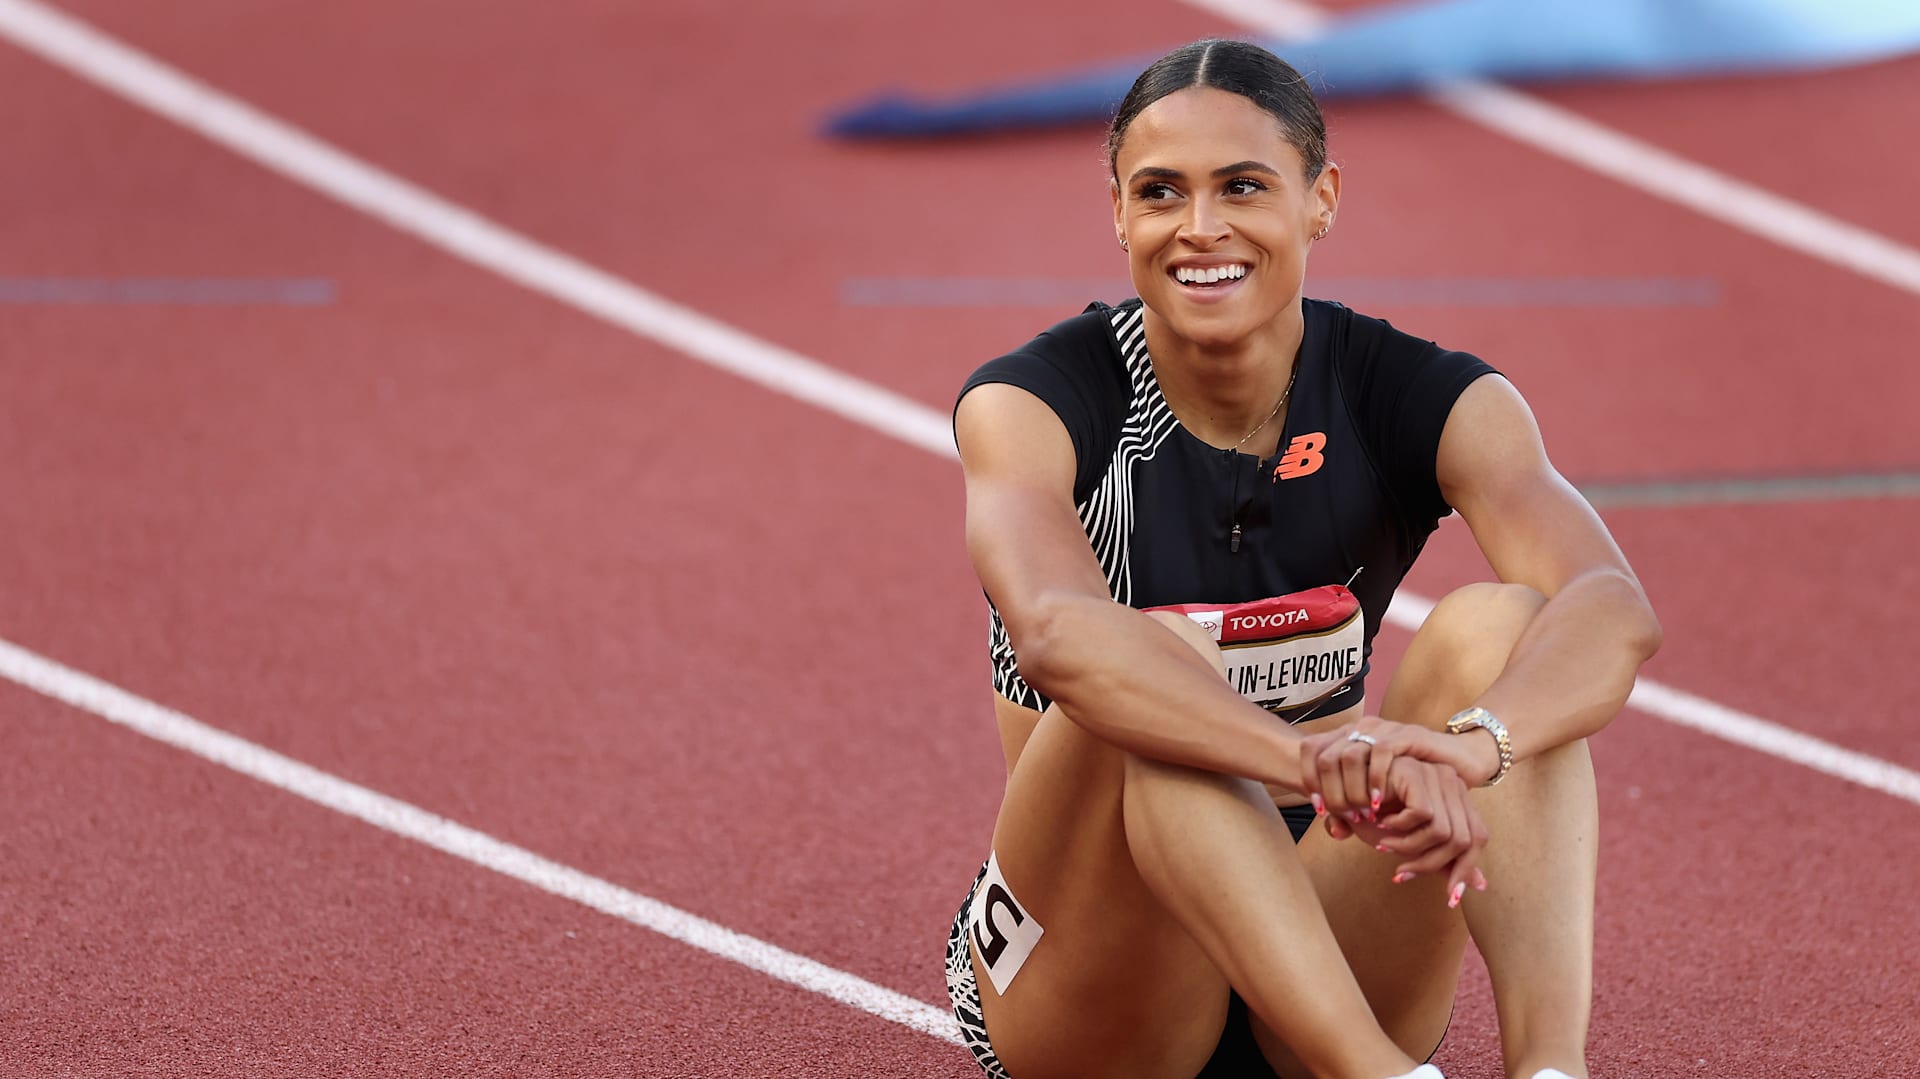 When one dream isn't enough: Sydney McLaughlin-Levrone, Yulimar Rojas,  Faith Kipyegon and the race for athletics world record doubles